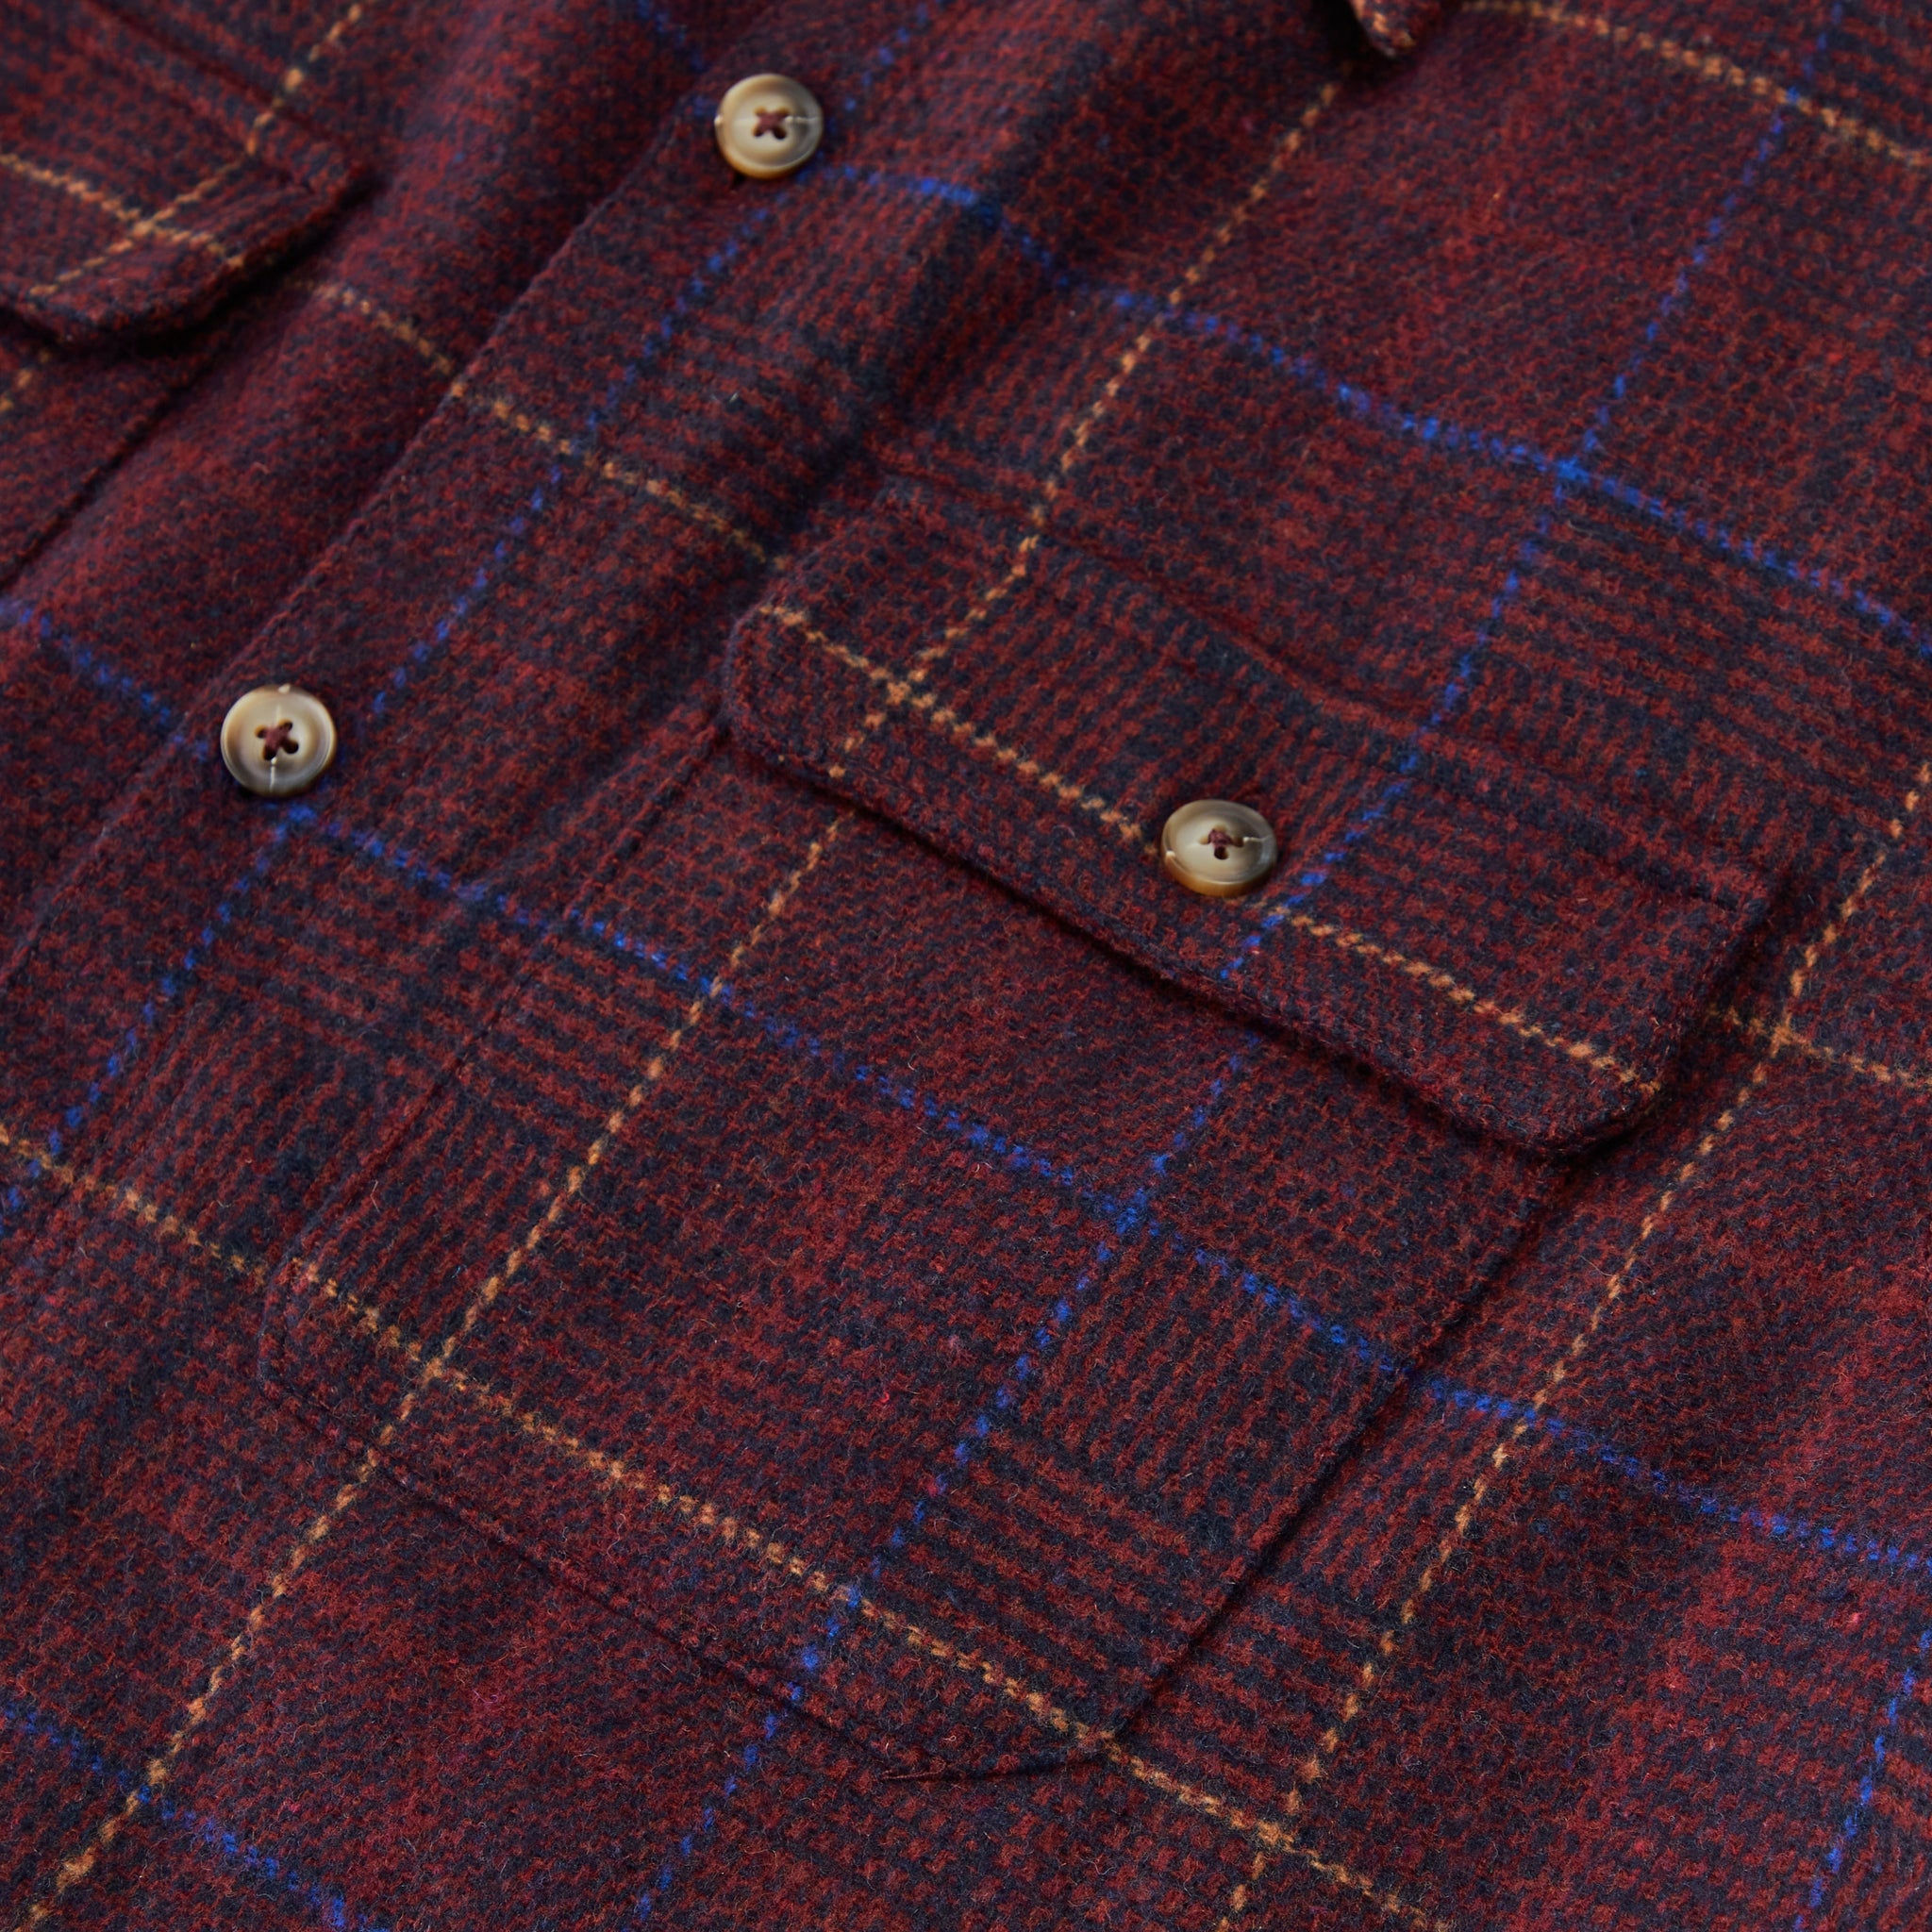 Quilted Flannel Overshirt - Burgundy